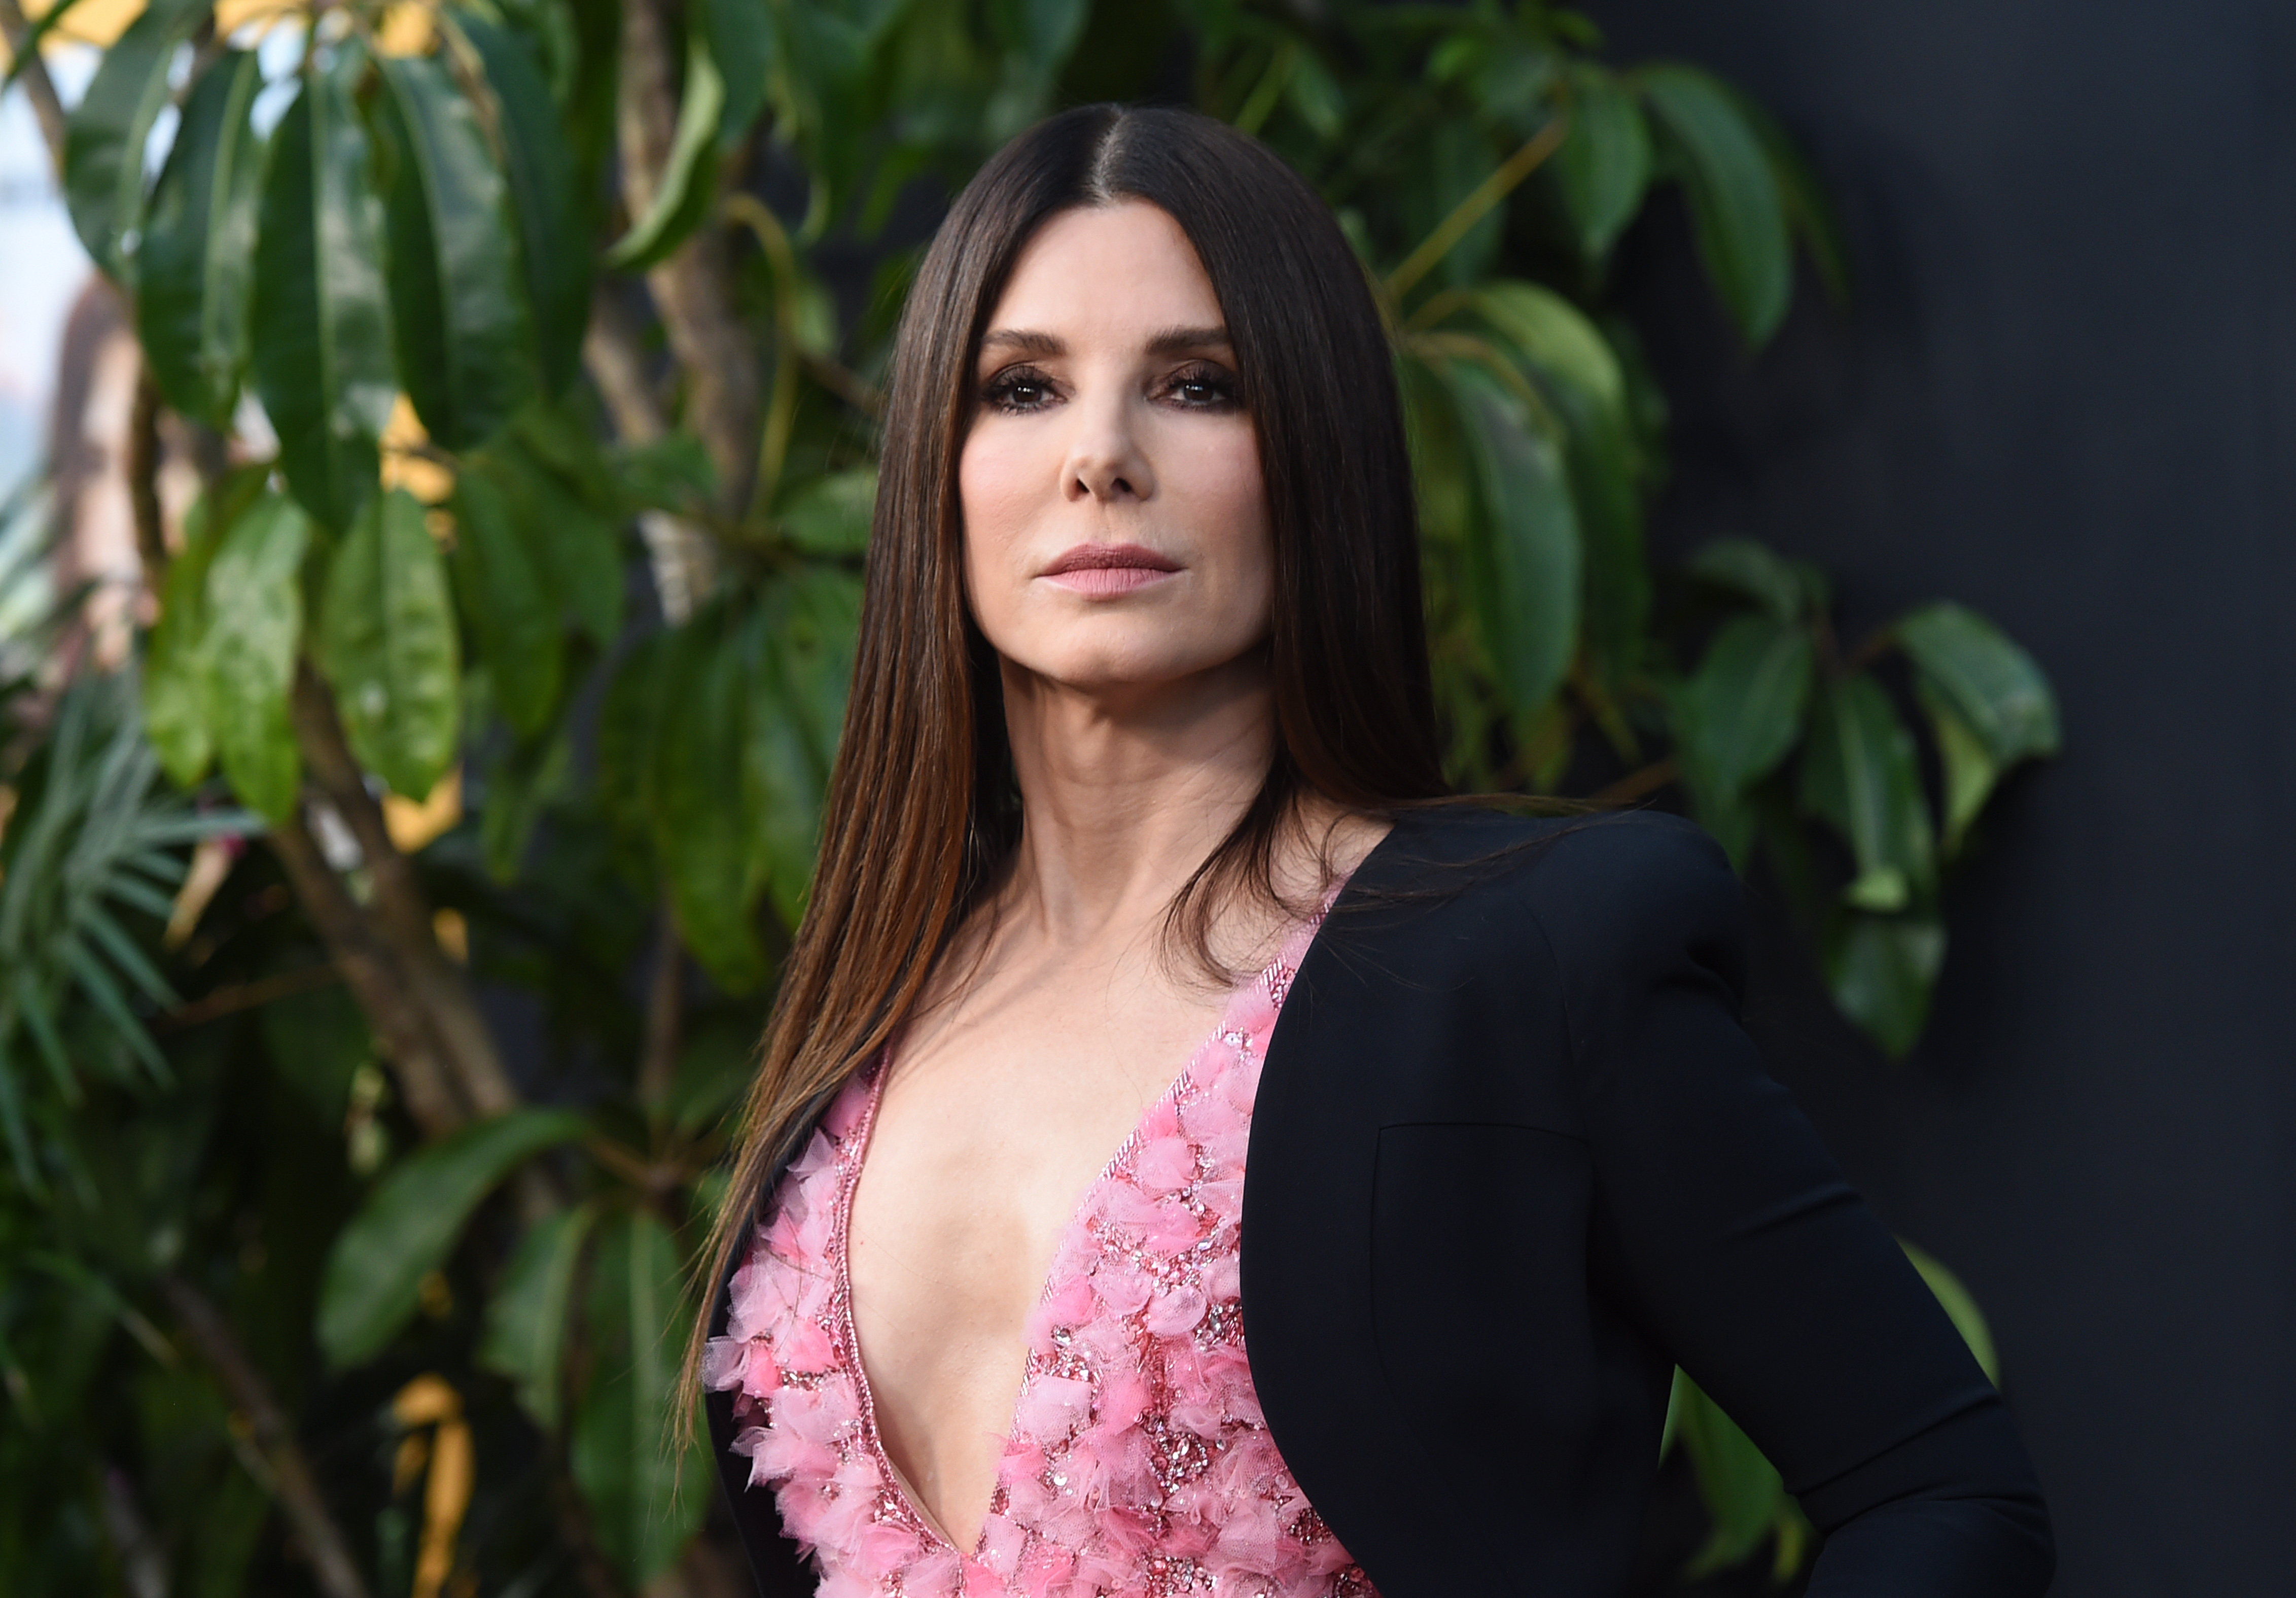 Sandra Bullock attends "The Lost City" premiere on March 21, 2022 in Los Angeles, California | Source: Getty Images